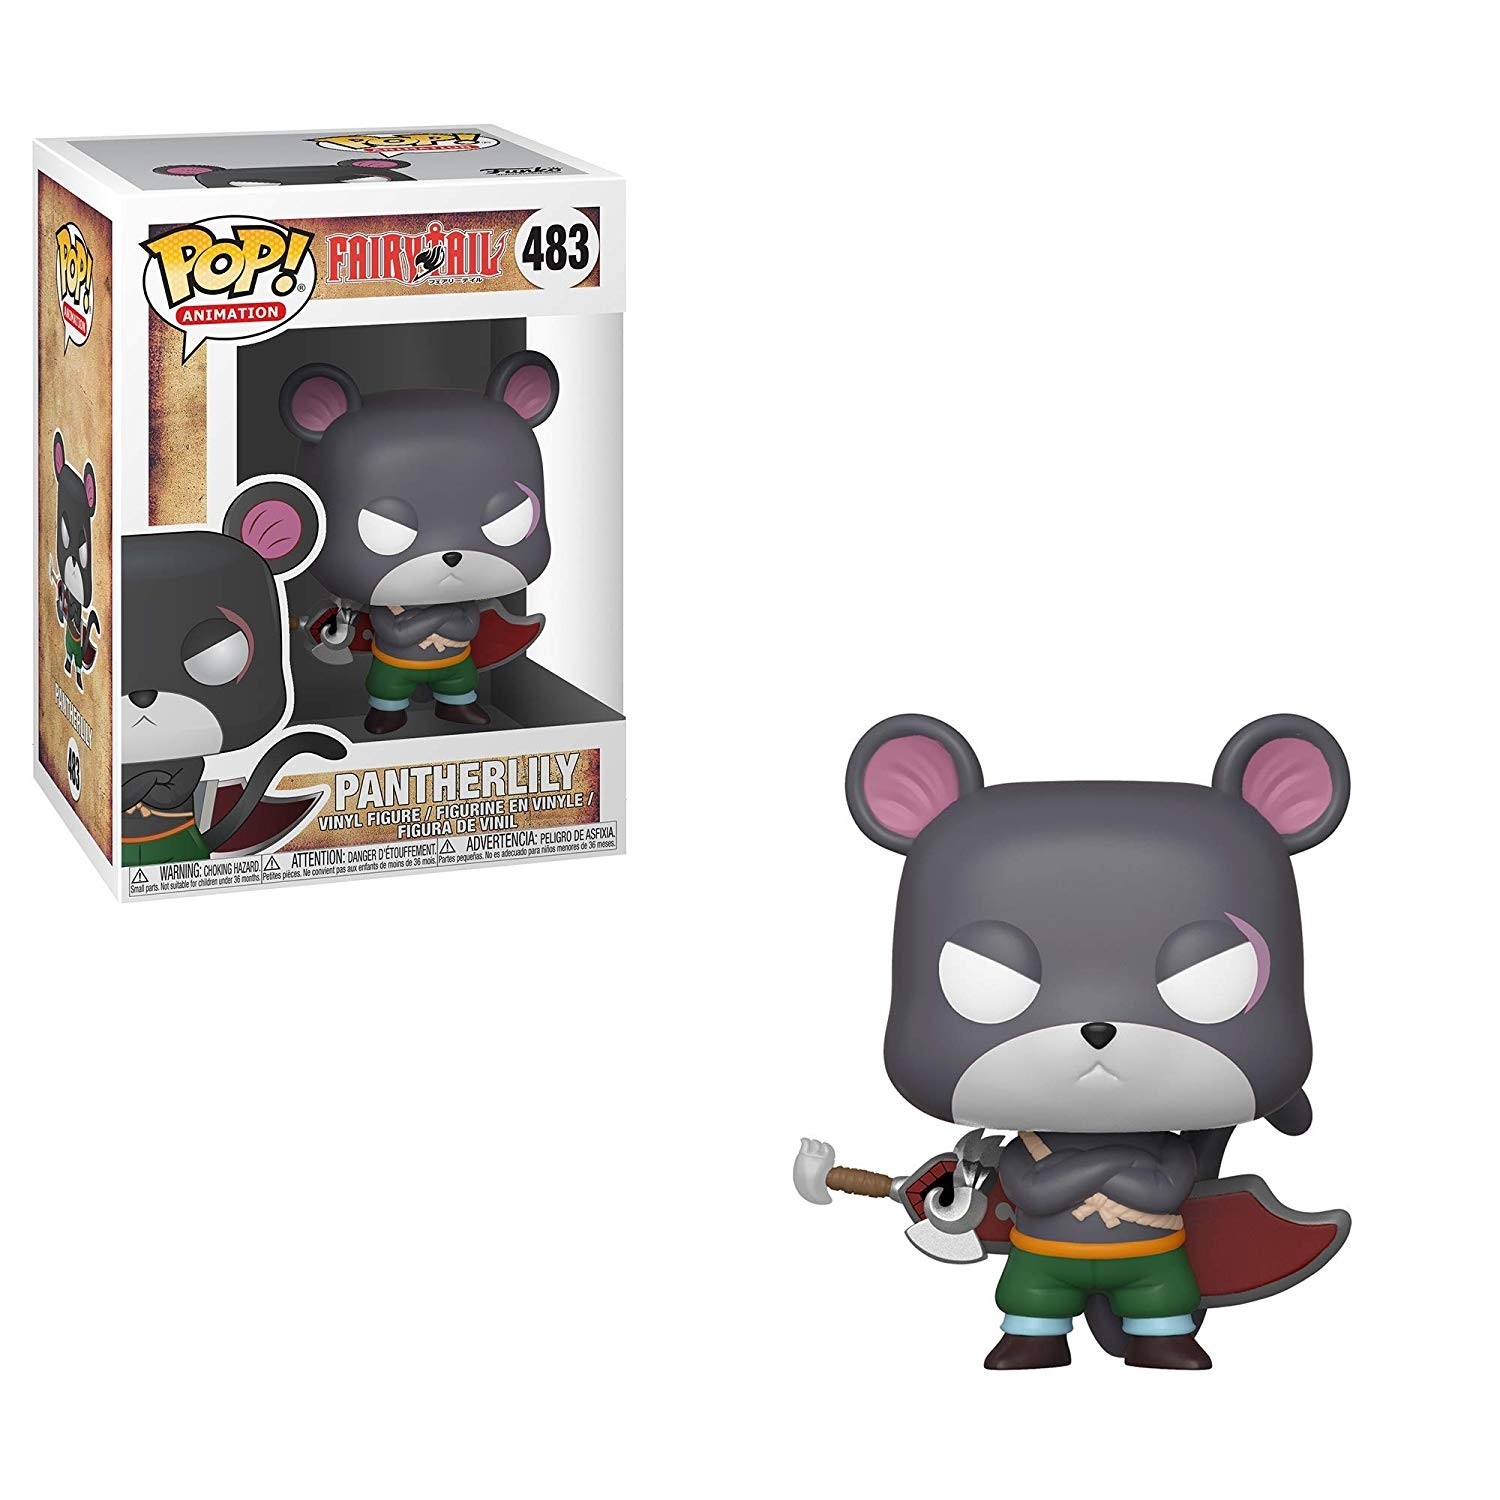 POP! Vinyl: Fairy Tail: Panther Lily 